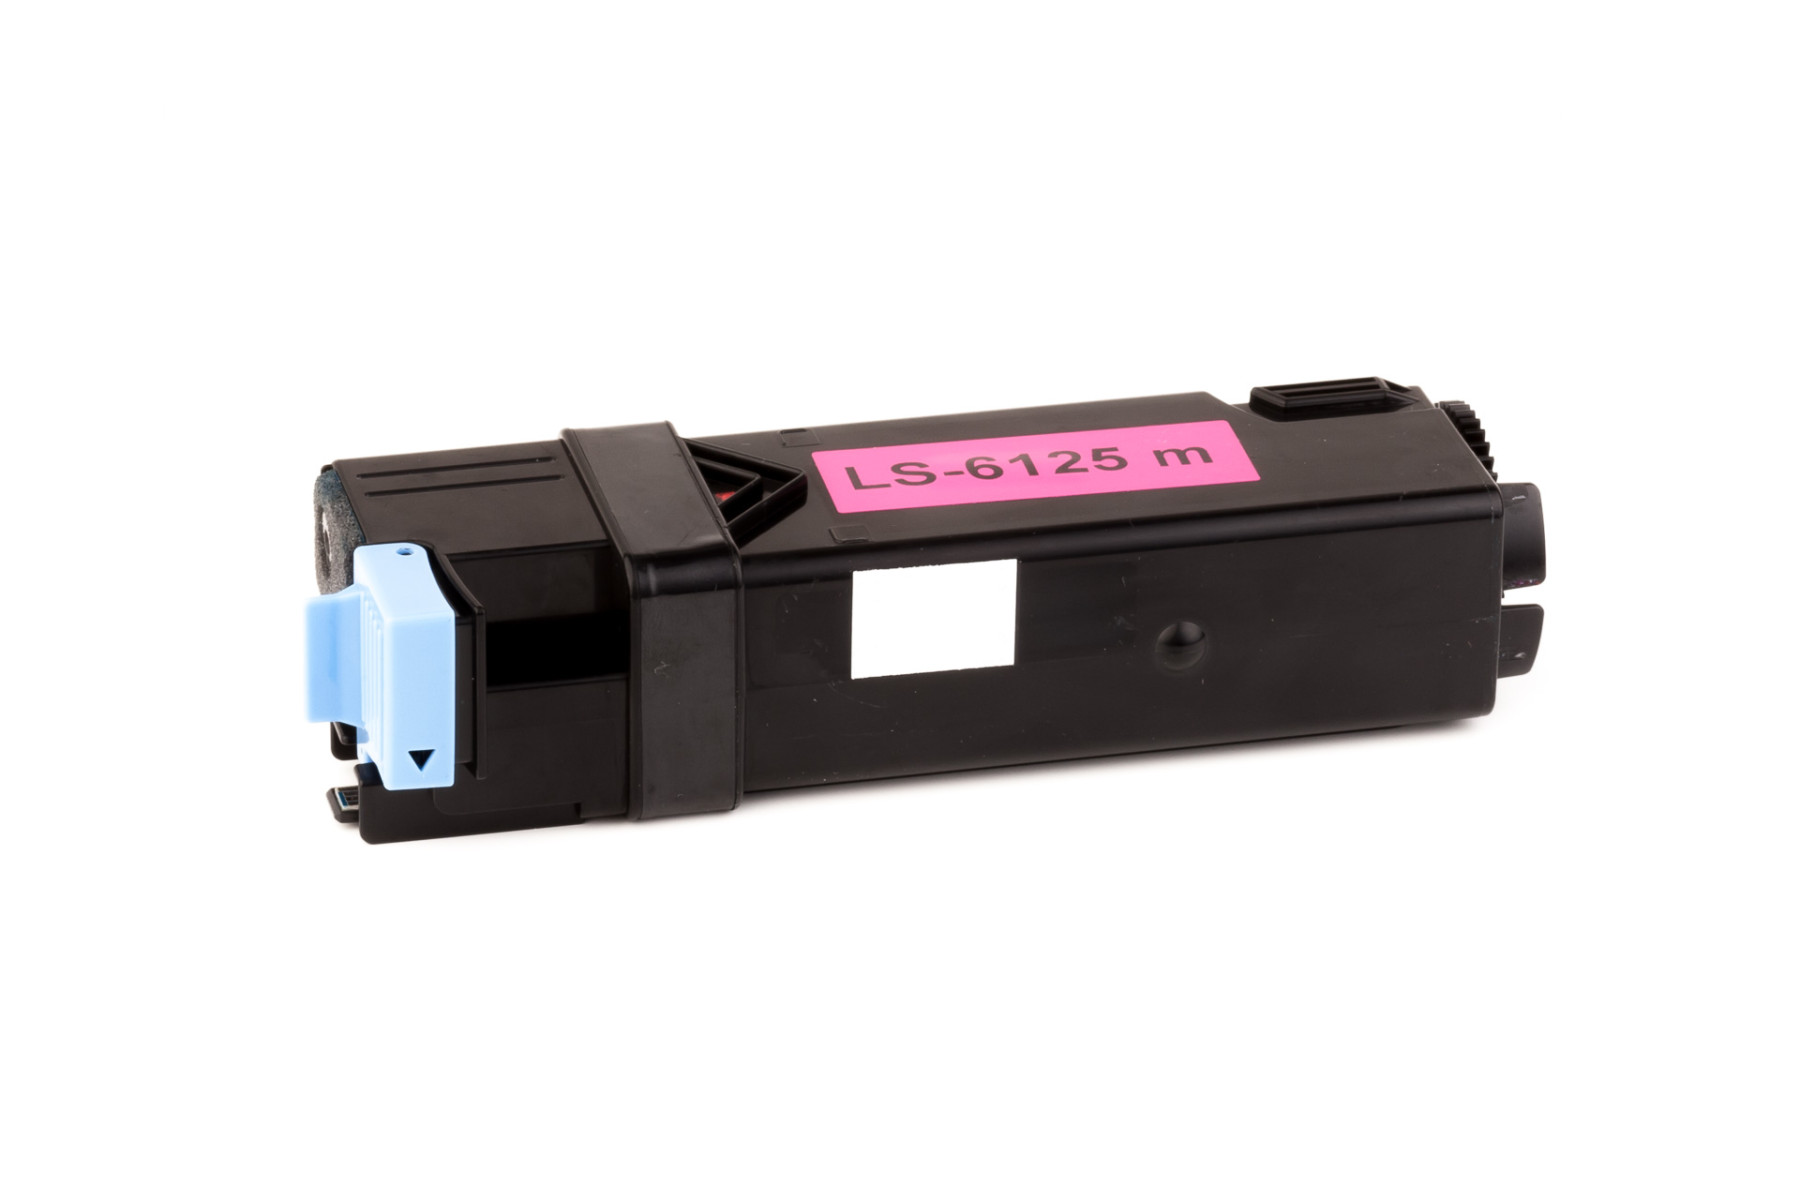 Set consisting of Toner cartridge (alternative) compatible with Xerox Phaser 6125 black, cyan, magenta, yellow - Save 6%